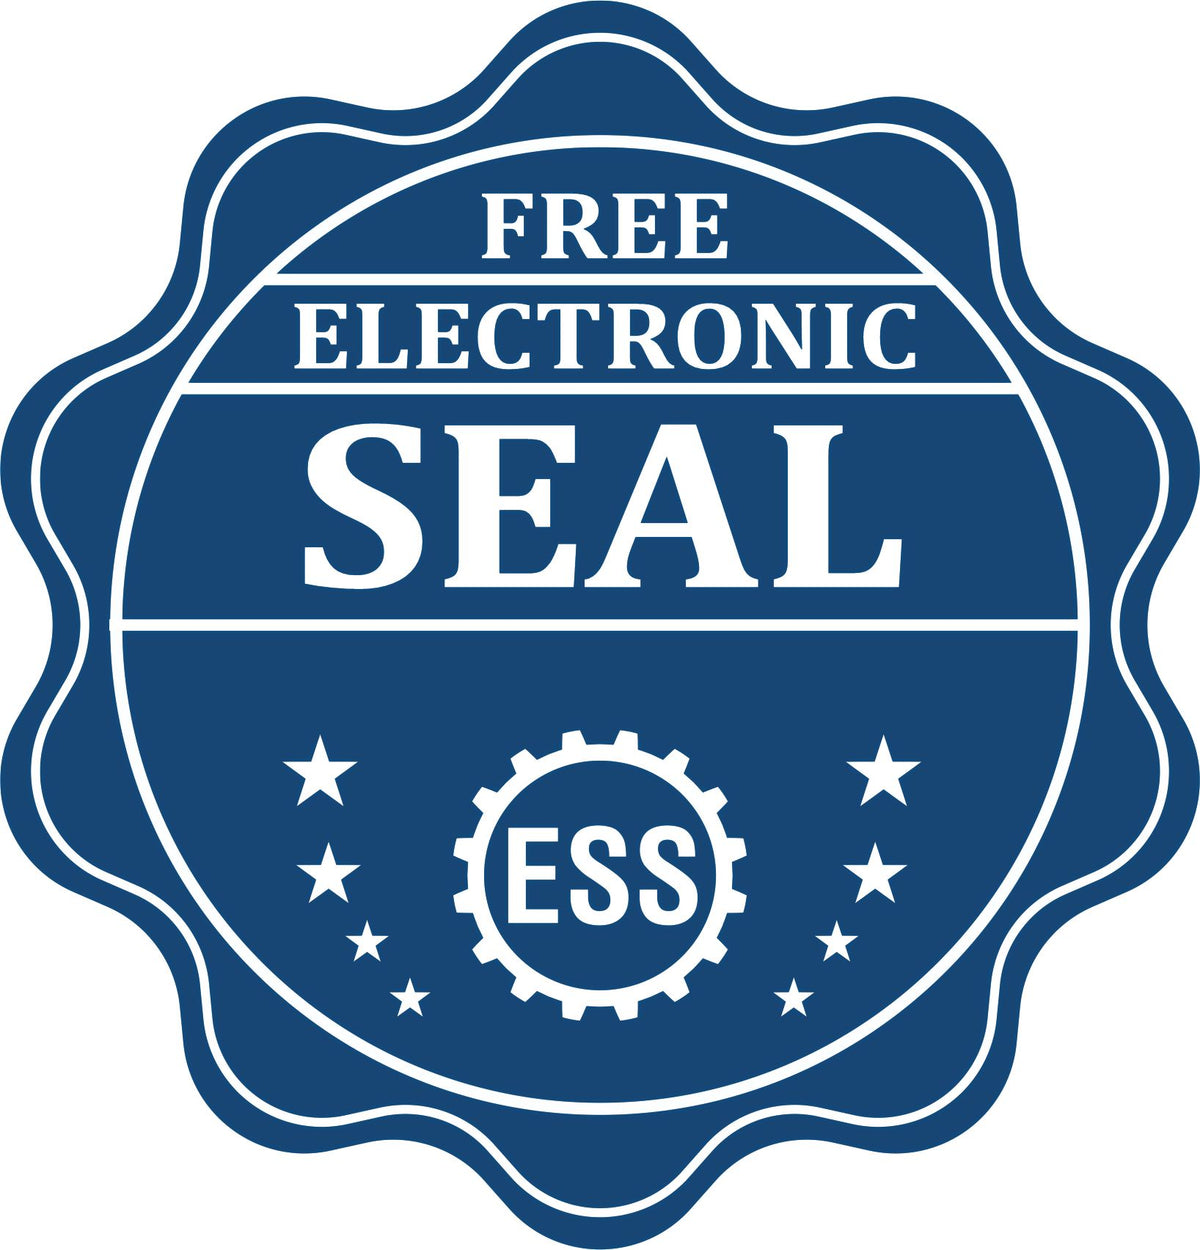 A badge showing a free electronic seal for the State of Vermont Extended Long Reach Engineer Seal with stars and the ESS gear on the emblem.